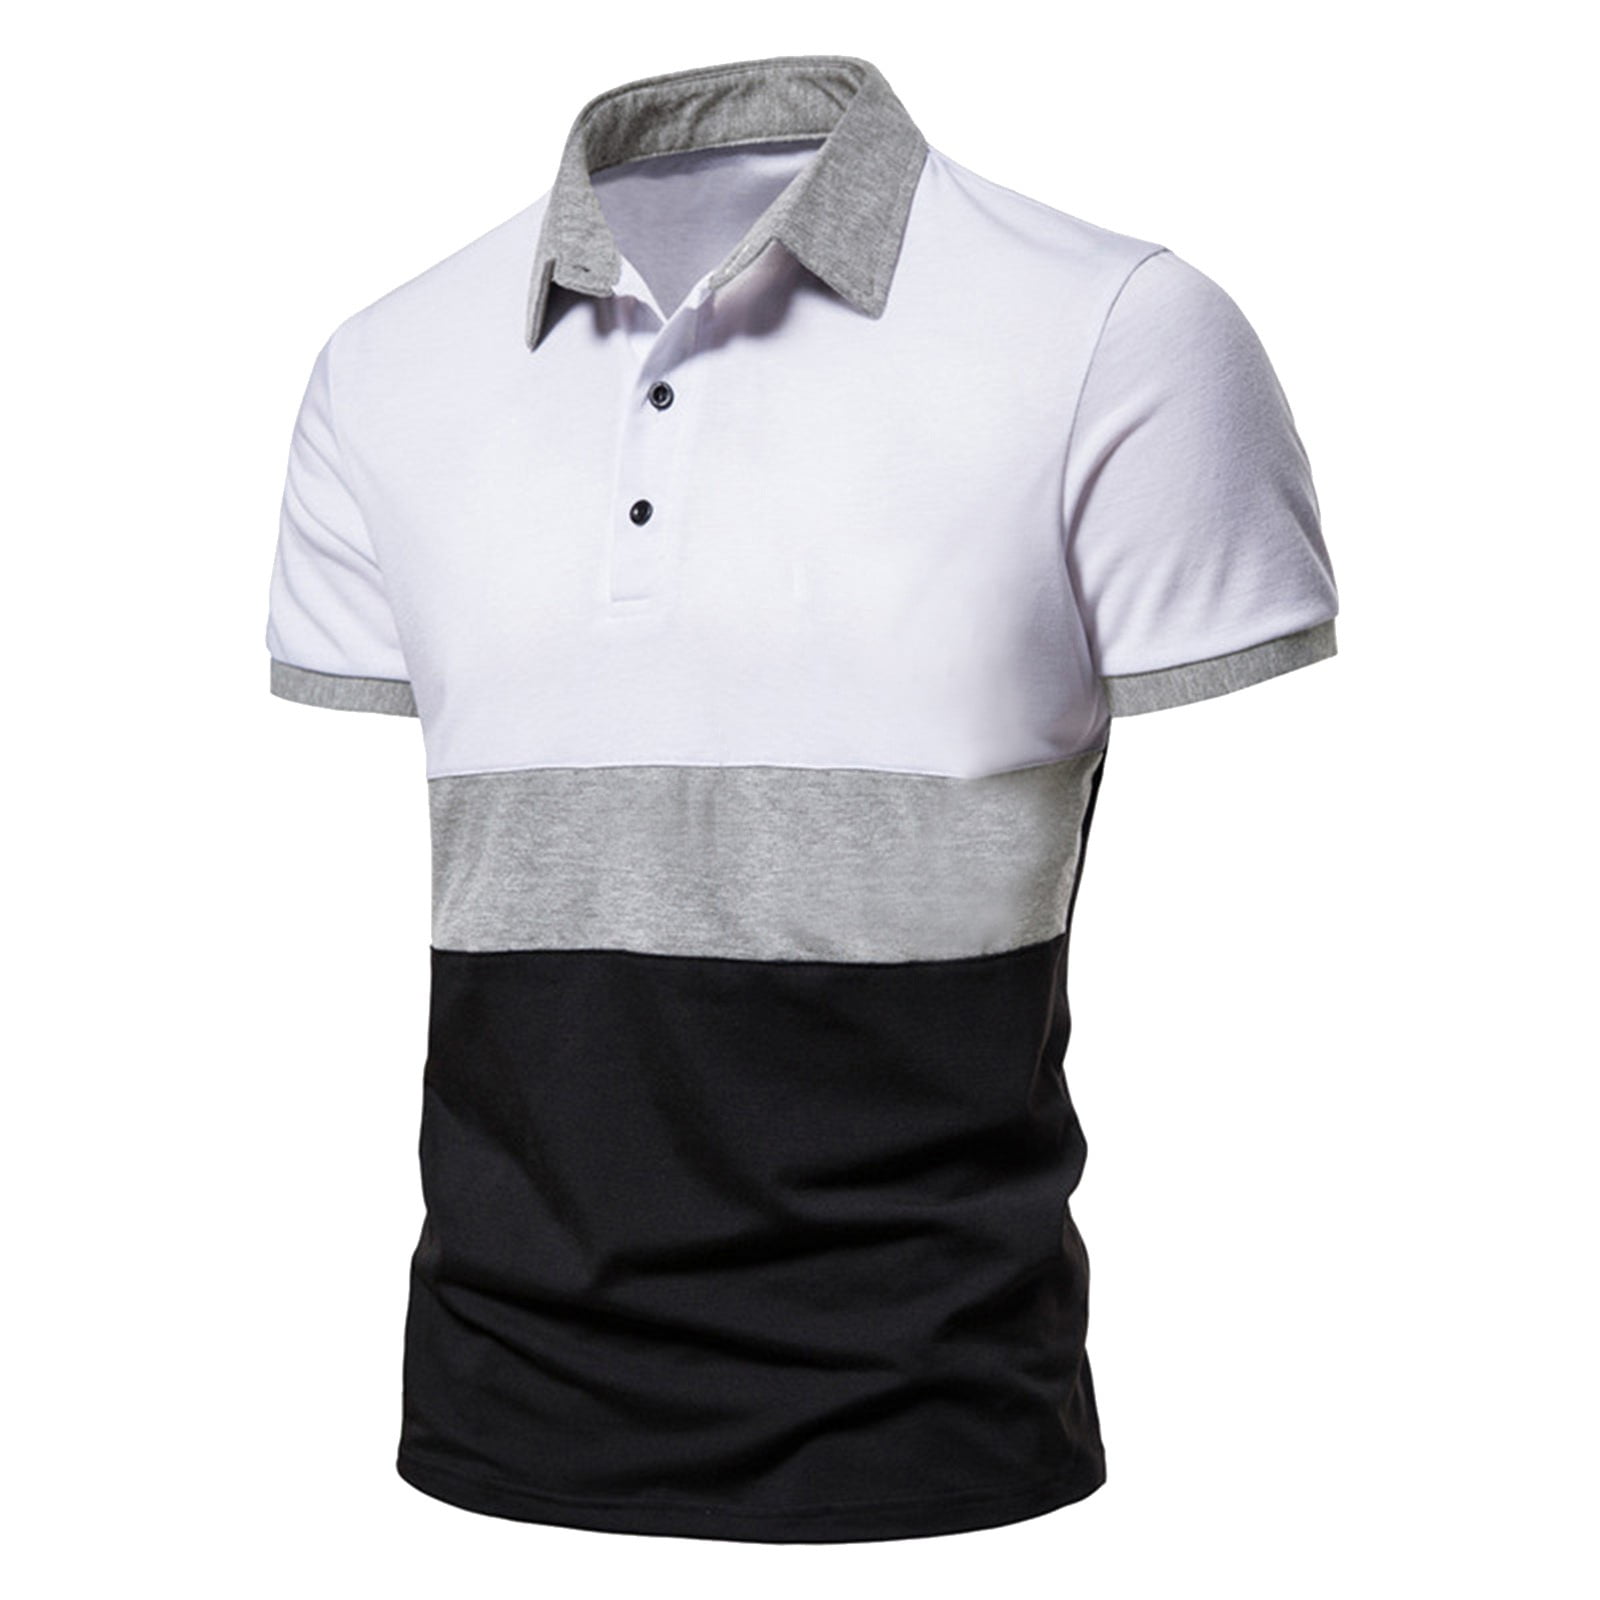 Pxiakgy polo shirts for men Men Spring Summer Casual Sports Top Shirt ...